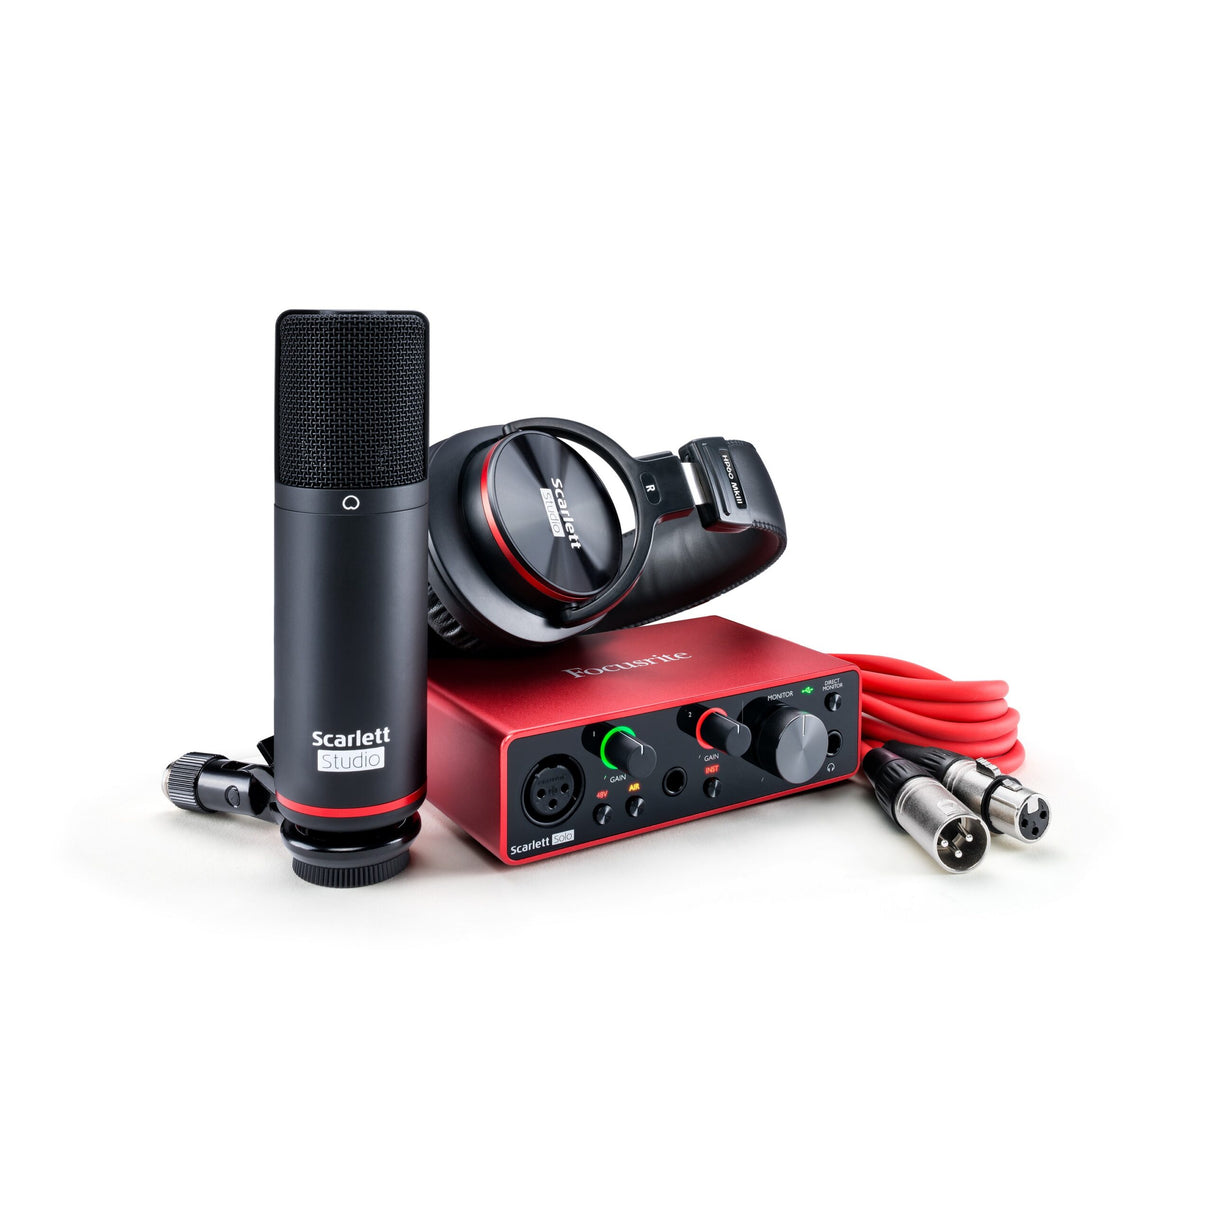 Focusrite Scarlett Solo Studio 2 x 2 USB Audio Interface with Condenser Microphone and Headphone, 3rd Generation